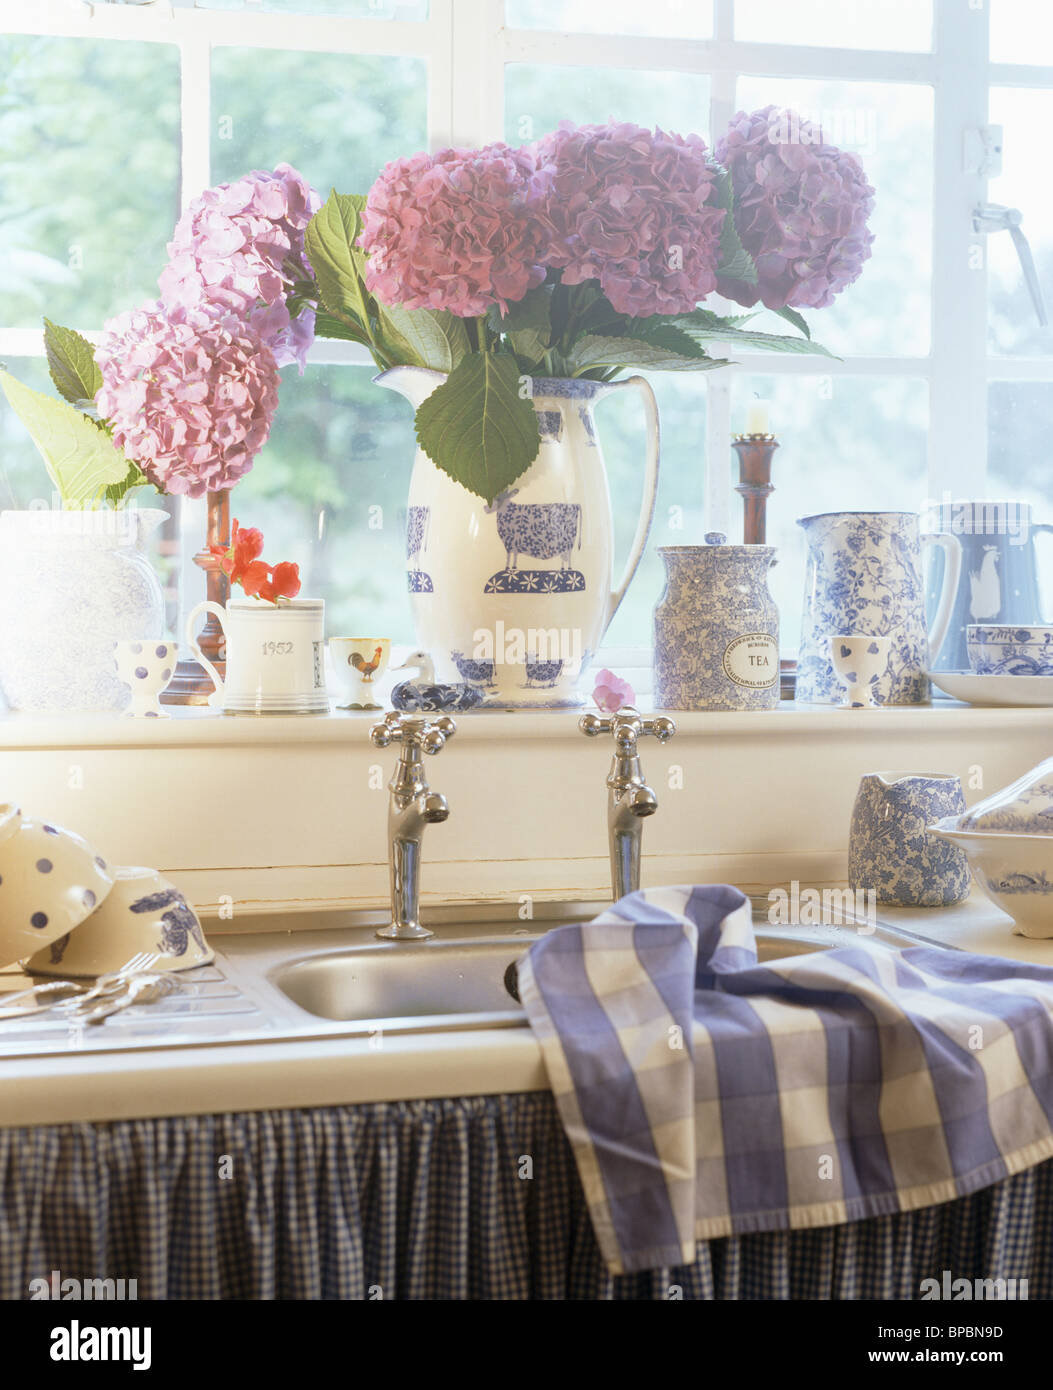 Close-up of jug of mauve hydrangeas on window-sill above kitchen sink with blue+white checked tea-towel Stock Photo